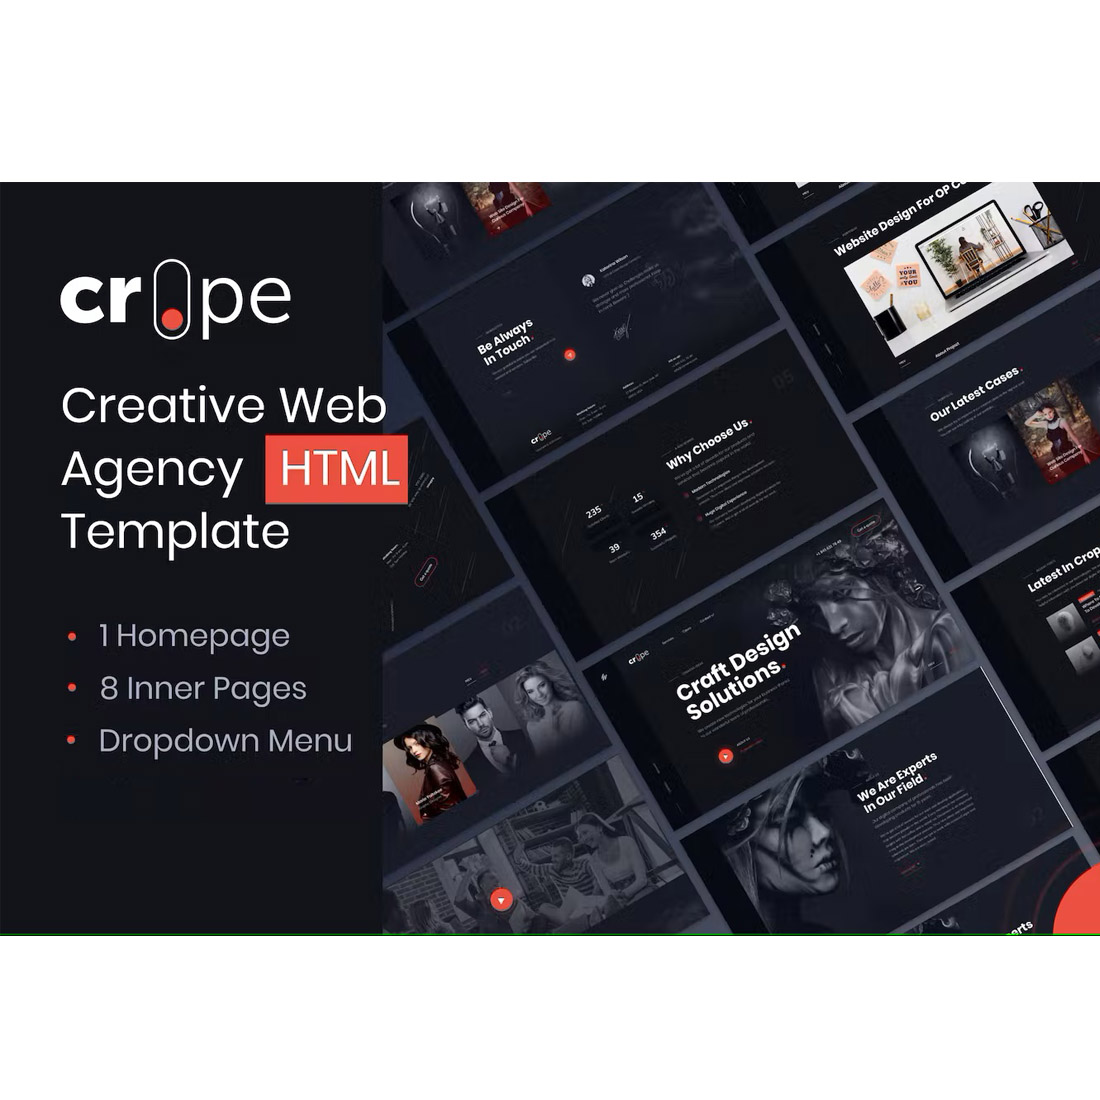 Crope - Creative Web Agency HTML Template cover image.